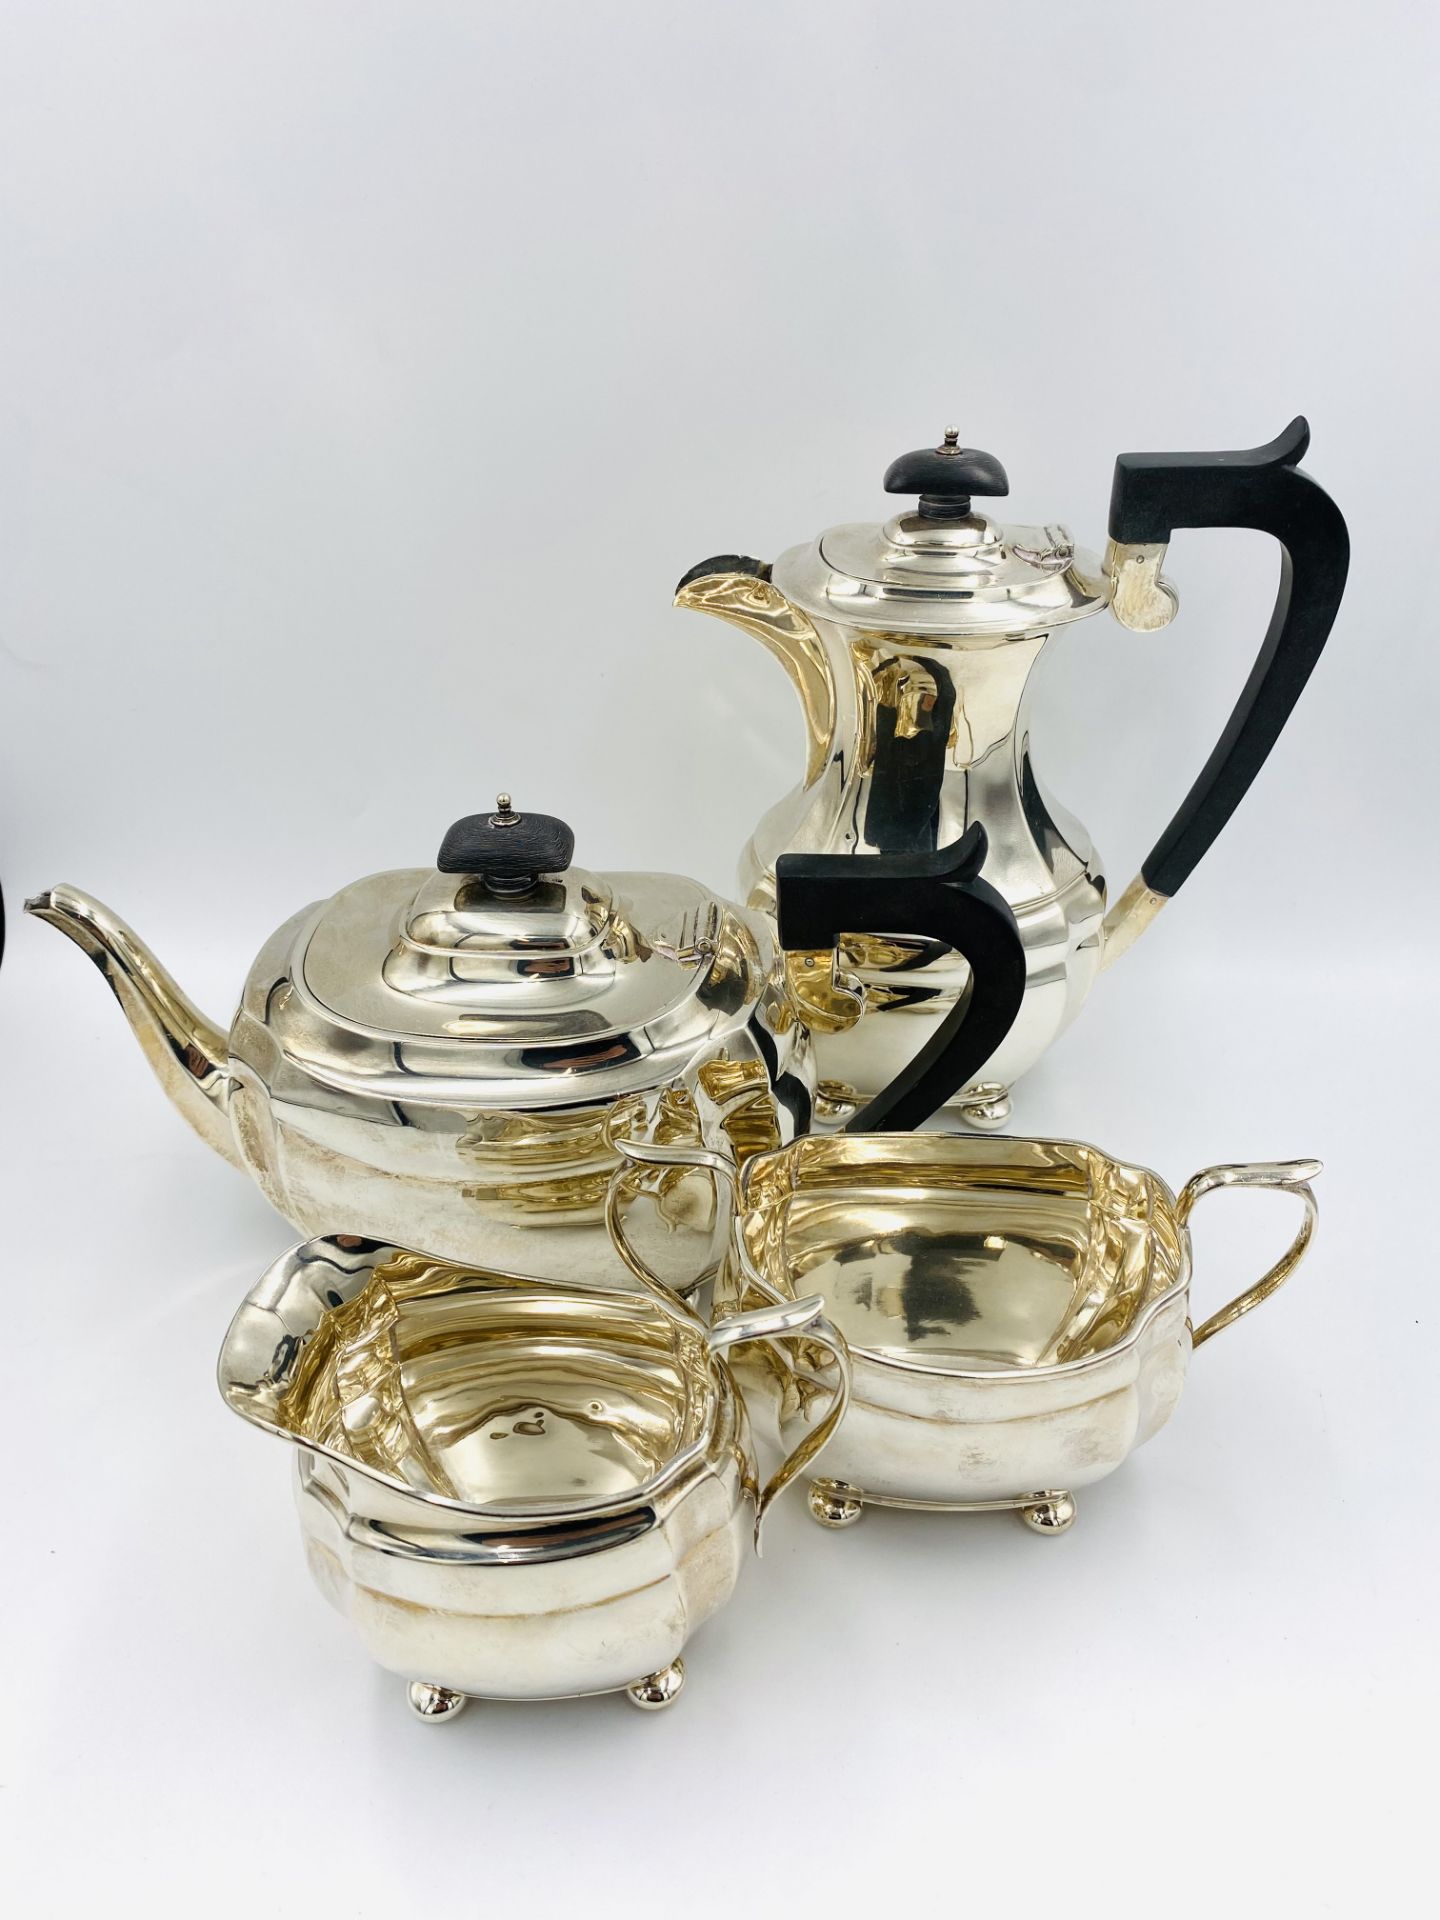 Silver tea and coffee set, Chester 1930 - Image 2 of 5